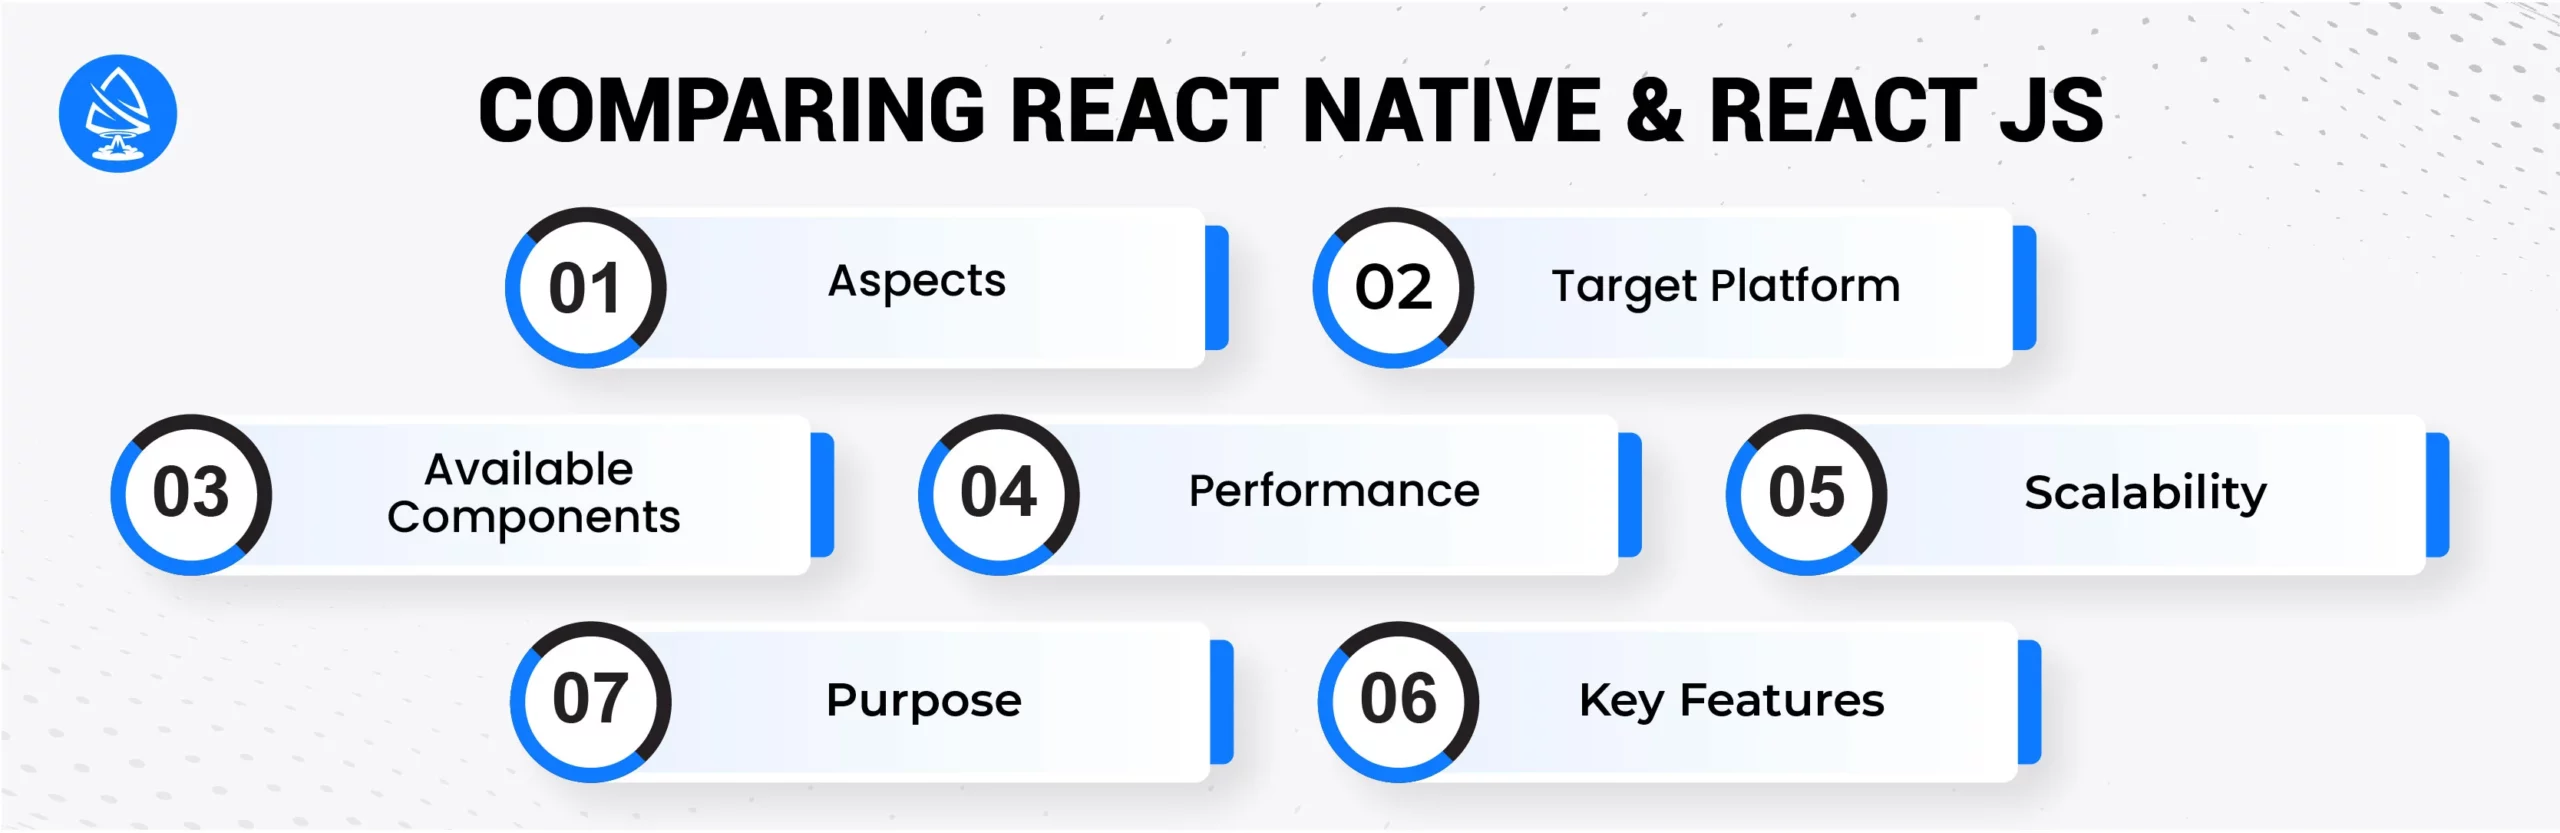 Comparing React Native and React JS